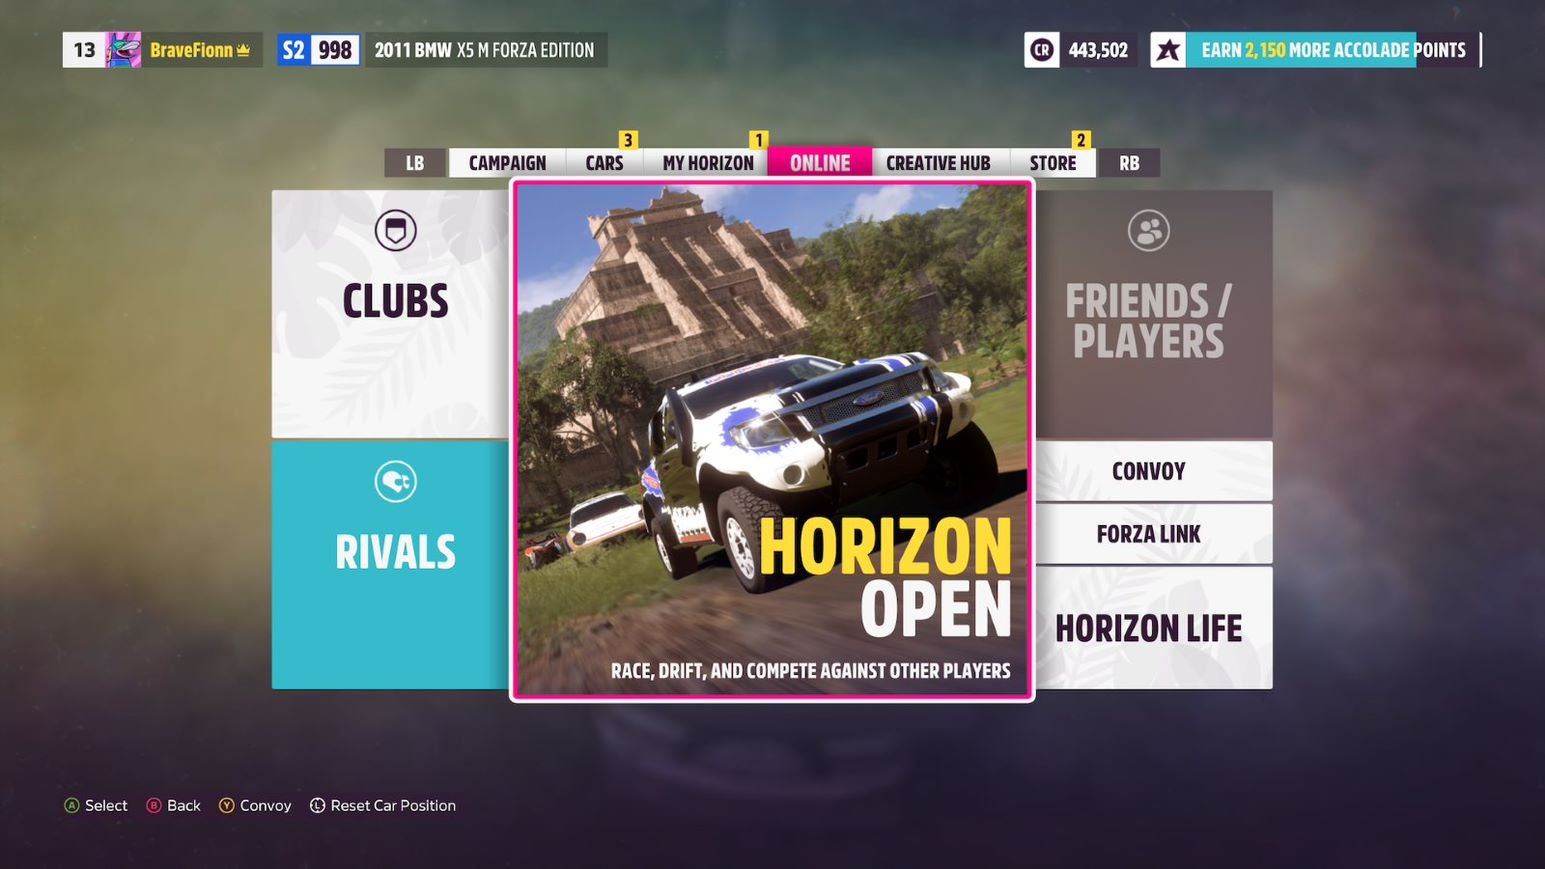 Image for Forza Horizon 5 multiplayer - How to join a friend's session in Forza Horizon 5